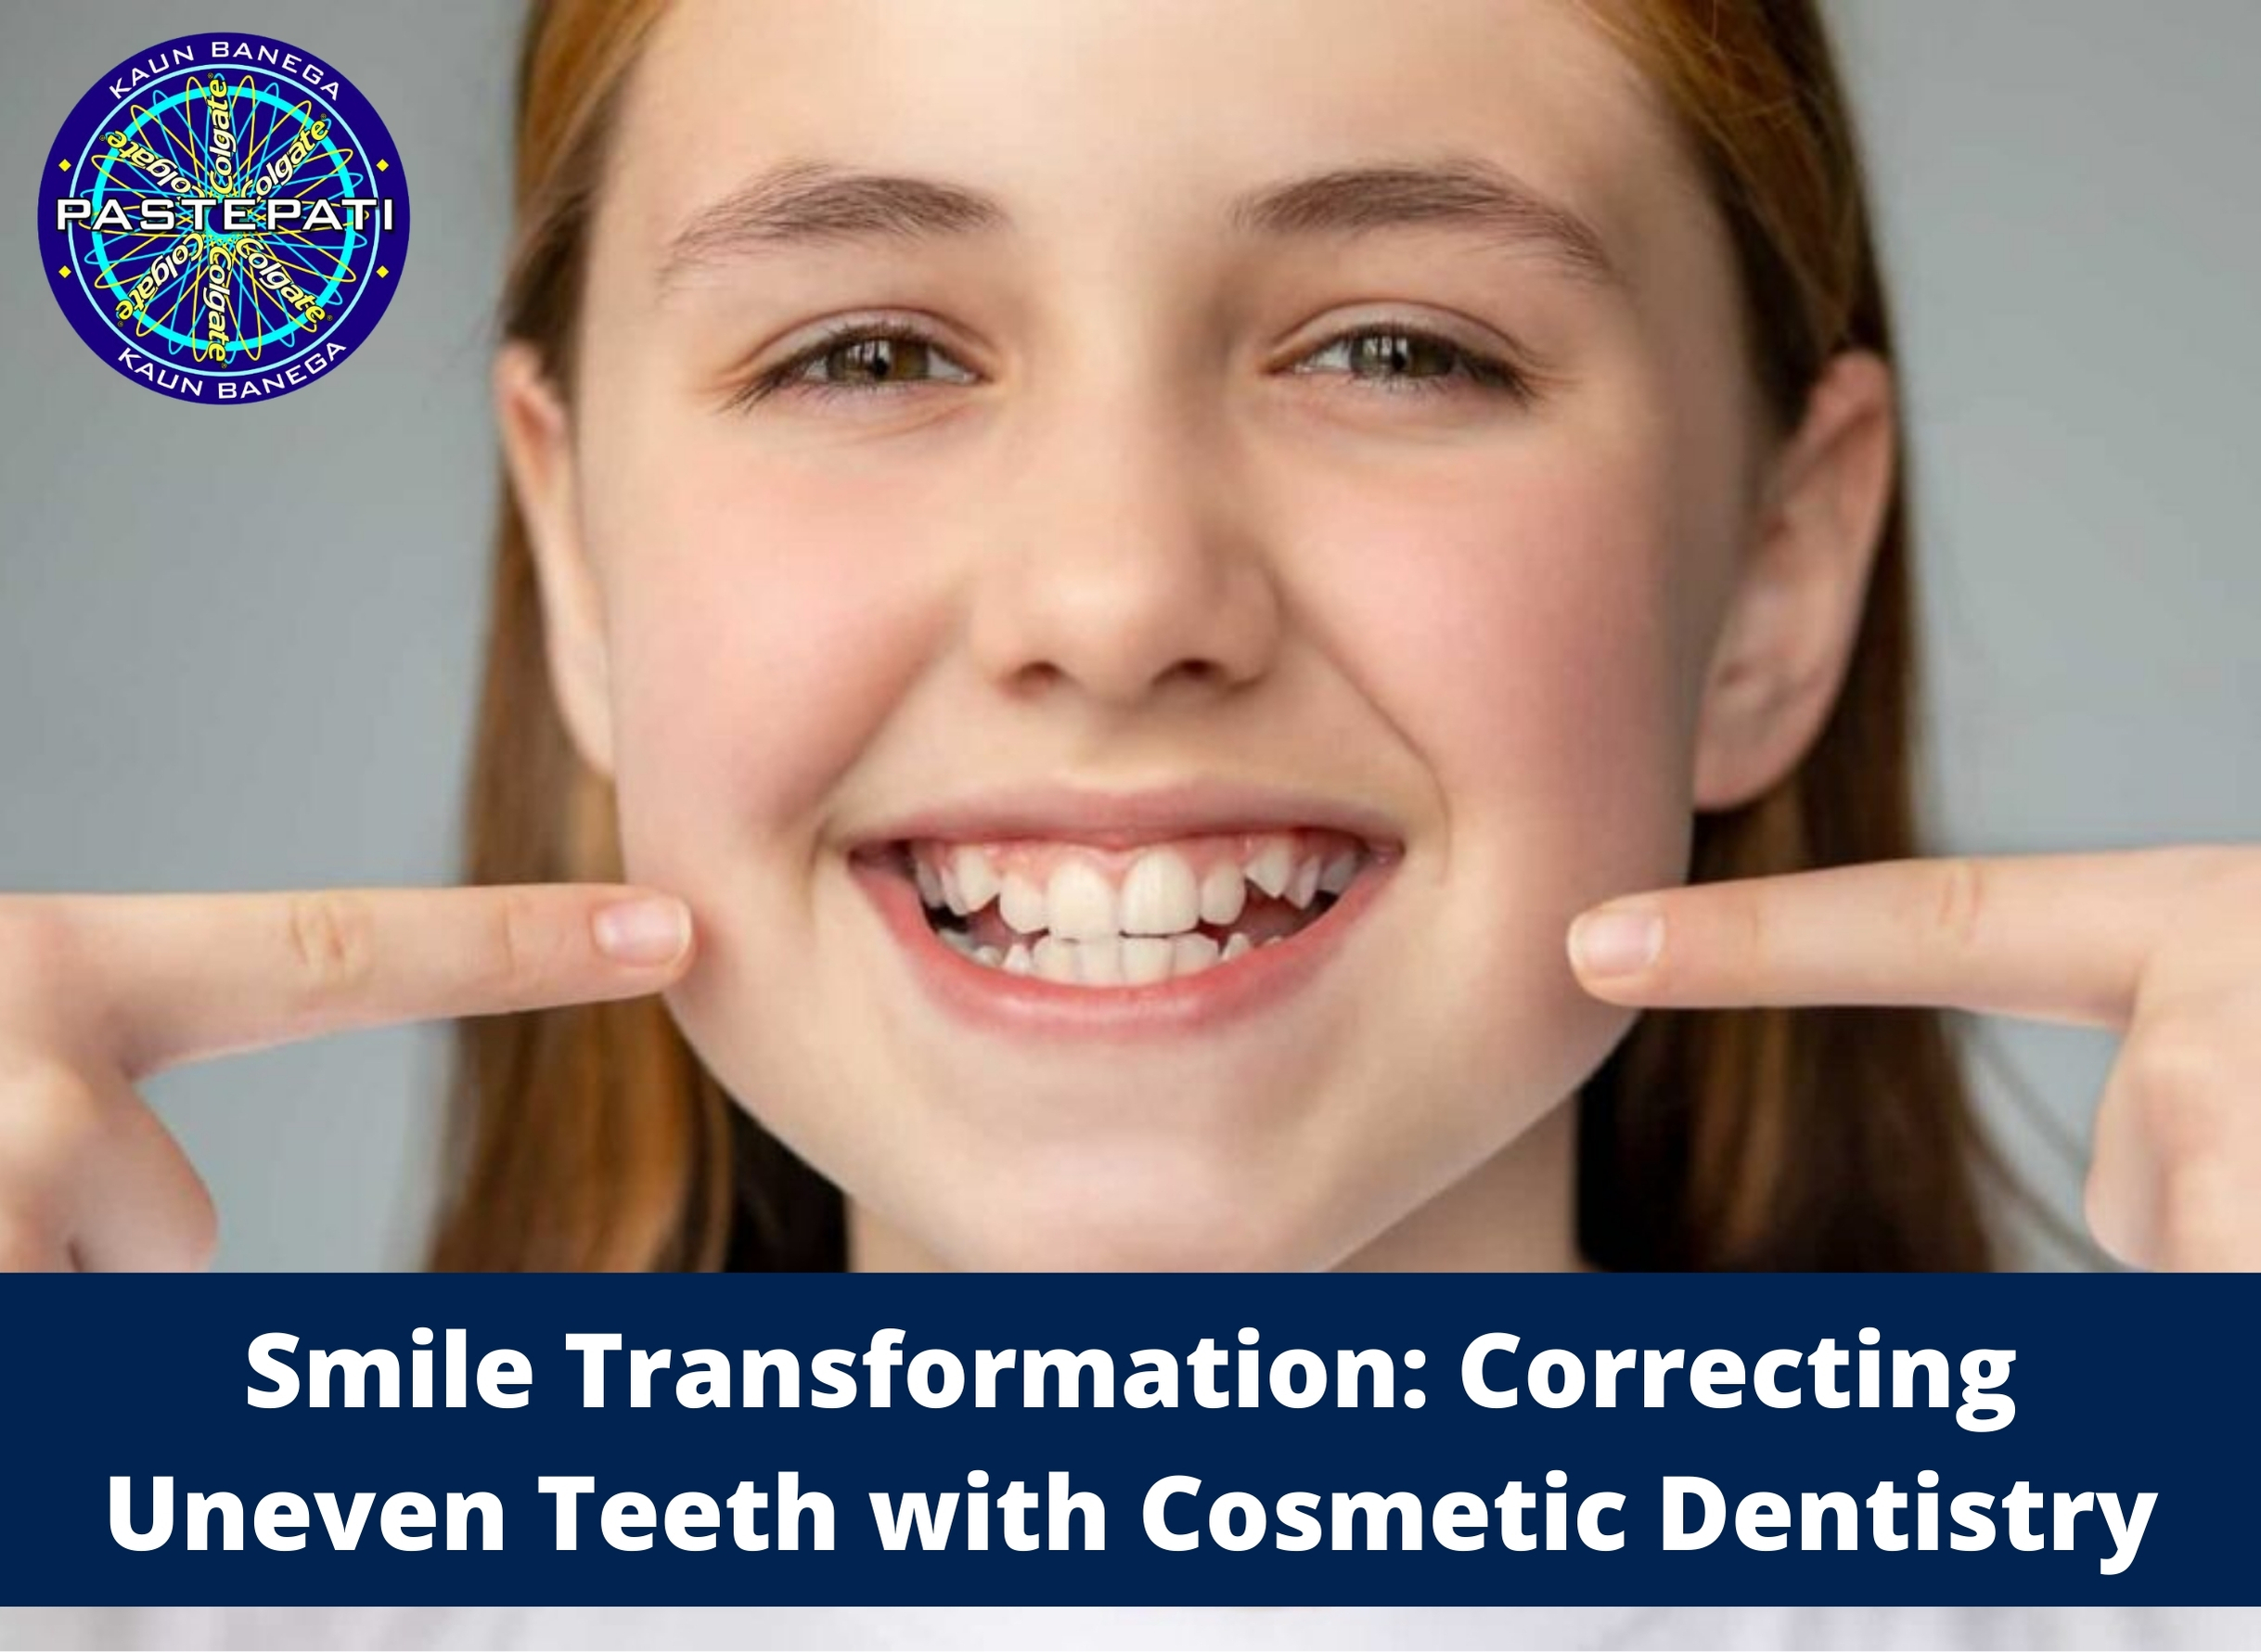 Smile Transformation: Correcting Uneven Teeth with Cosmetic Dentistry